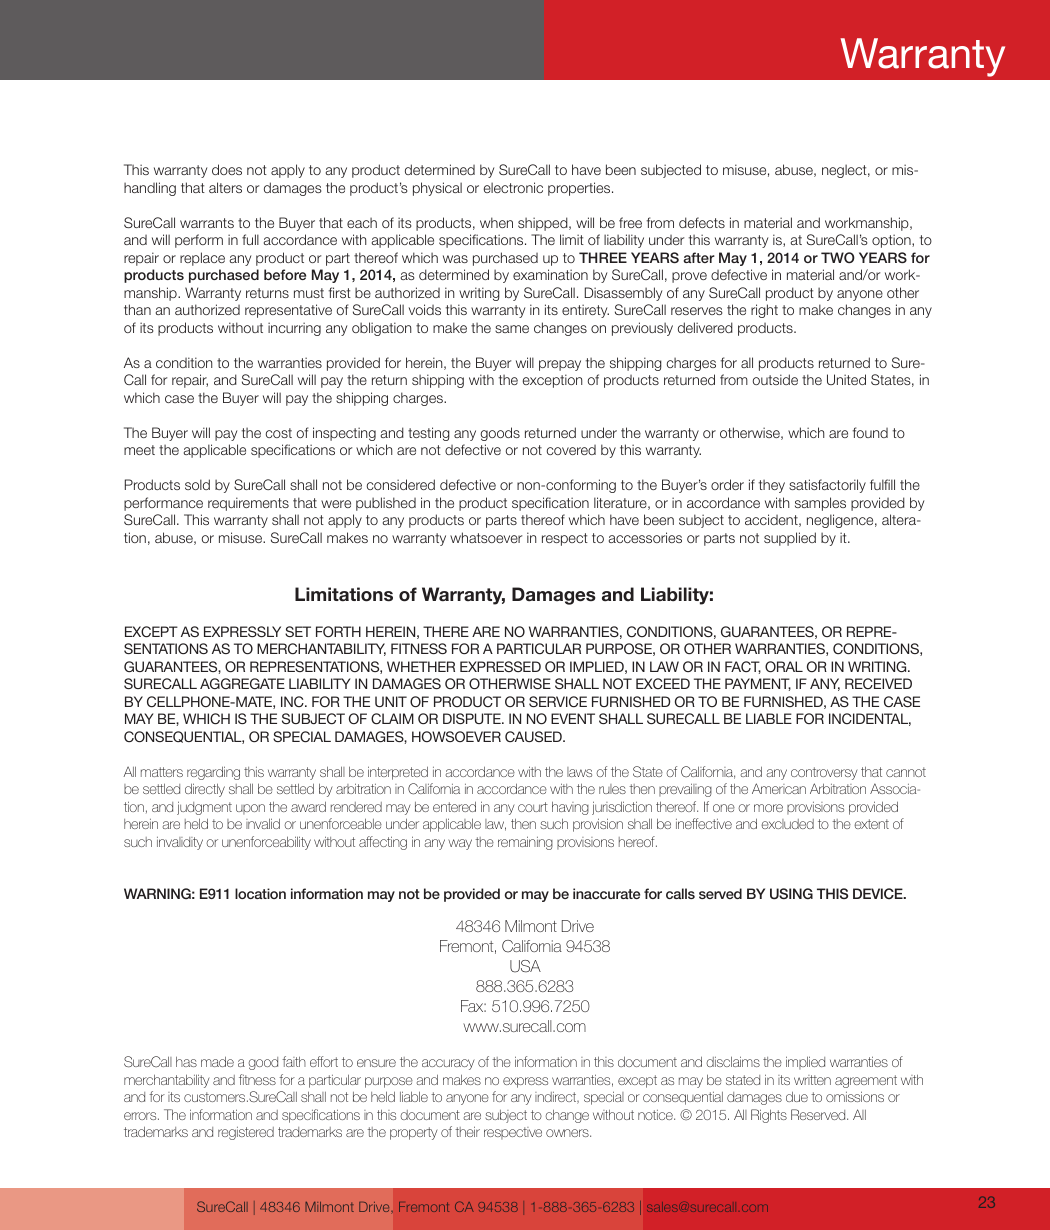 Limitations of Warranty, Damages and Liability:EXCEPT AS EXPRESSLY SET FORTH HEREIN, THERE ARE NO WARRANTIES, CONDITIONS, GUARANTEES, OR REPRE-SENTATIONS AS TO MERCHANTABILITY, FITNESS FOR A PARTICULAR PURPOSE, OR OTHER WARRANTIES, CONDITIONS, GUARANTEES, OR REPRESENTATIONS, WHETHER EXPRESSED OR IMPLIED, IN LAW OR IN FACT, ORAL OR IN WRITING.SURECALL AGGREGATE LIABILITY IN DAMAGES OR OTHERWISE SHALL NOT EXCEED THE PAYMENT, IF ANY, RECEIVED BY CELLPHONE-MATE, INC. FOR THE UNIT OF PRODUCT OR SERVICE FURNISHED OR TO BE FURNISHED, AS THE CASE MAY BE, WHICH IS THE SUBJECT OF CLAIM OR DISPUTE. IN NO EVENT SHALL SURECALL BE LIABLE FOR INCIDENTAL, CONSEQUENTIAL, OR SPECIAL DAMAGES, HOWSOEVER CAUSED. All matters regarding this warranty shall be interpreted in accordance with the laws of the State of California, and any controversy that cannot be settled directly shall be settled by arbitration in California in accordance with the rules then prevailing of the American Arbitration Associa-tion, and judgment upon the award rendered may be entered in any court having jurisdiction thereof. If one or more provisions provided hereinareheldtobeinvalidorunenforceableunderapplicablelaw,thensuchprovisionshallbeineectiveandexcludedtotheextentofsuchinvalidityorunenforceabilitywithoutaectinginanywaytheremainingprovisionshereof.WARNING: E911 location information may not be provided or may be inaccurate for calls served BY USING THIS DEVICE.48346 Milmont DriveFremont, California 94538USA888.365.6283Fax: 510.996.7250www.surecall.comSureCallhasmadeagoodfaitheorttoensuretheaccuracyoftheinformationinthisdocumentanddisclaimstheimpliedwarrantiesofmerchantabilityandtnessforaparticularpurposeandmakesnoexpresswarranties,exceptasmaybestatedinitswrittenagreementwithand for its customers.SureCall shall not be held liable to anyone for any indirect, special or consequential damages due to omissions or  errors.Theinformationandspecicationsinthisdocumentaresubjecttochangewithoutnotice.©2015.AllRightsReserved.All trademarks and registered trademarks are the property of their respective owners.This warranty does not apply to any product determined by SureCall to have been subjected to misuse, abuse, neglect, or mis-handling that alters or damages the product’s physical or electronic properties.SureCall warrants to the Buyer that each of its products, when shipped, will be free from defects in material and workmanship, and will perform in full accordance with applicable specications. The limit of liability under this warranty is, at SureCall’s option, to repair or replace any product or part thereof which was purchased up to THREE YEARS after May 1, 2014 or TWO YEARS for products purchased before May 1, 2014, as determined by examination by SureCall, prove defective in material and/or work-manship. Warranty returns must rst be authorized in writing by SureCall. Disassembly of any SureCall product by anyone other than an authorized representative of SureCall voids this warranty in its entirety. SureCall reserves the right to make changes in any of its products without incurring any obligation to make the same changes on previously delivered products. As a condition to the warranties provided for herein, the Buyer will prepay the shipping charges for all products returned to Sure-Call for repair, and SureCall will pay the return shipping with the exception of products returned from outside the United States, in which case the Buyer will pay the shipping charges. The Buyer will pay the cost of inspecting and testing any goods returned under the warranty or otherwise, which are found to meet the applicable specications or which are not defective or not covered by this warranty. Products sold by SureCall shall not be considered defective or non-conforming to the Buyer’s order if they satisfactorily fulll the performance requirements that were published in the product specication literature, or in accordance with samples provided by SureCall. This warranty shall not apply to any products or parts thereof which have been subject to accident, negligence, altera-tion, abuse, or misuse. SureCall makes no warranty whatsoever in respect to accessories or parts not supplied by it.SureCall | 48346 Milmont Drive, Fremont CA 94538 | 1-888-365-6283 | sales@surecall.com 23Warranty